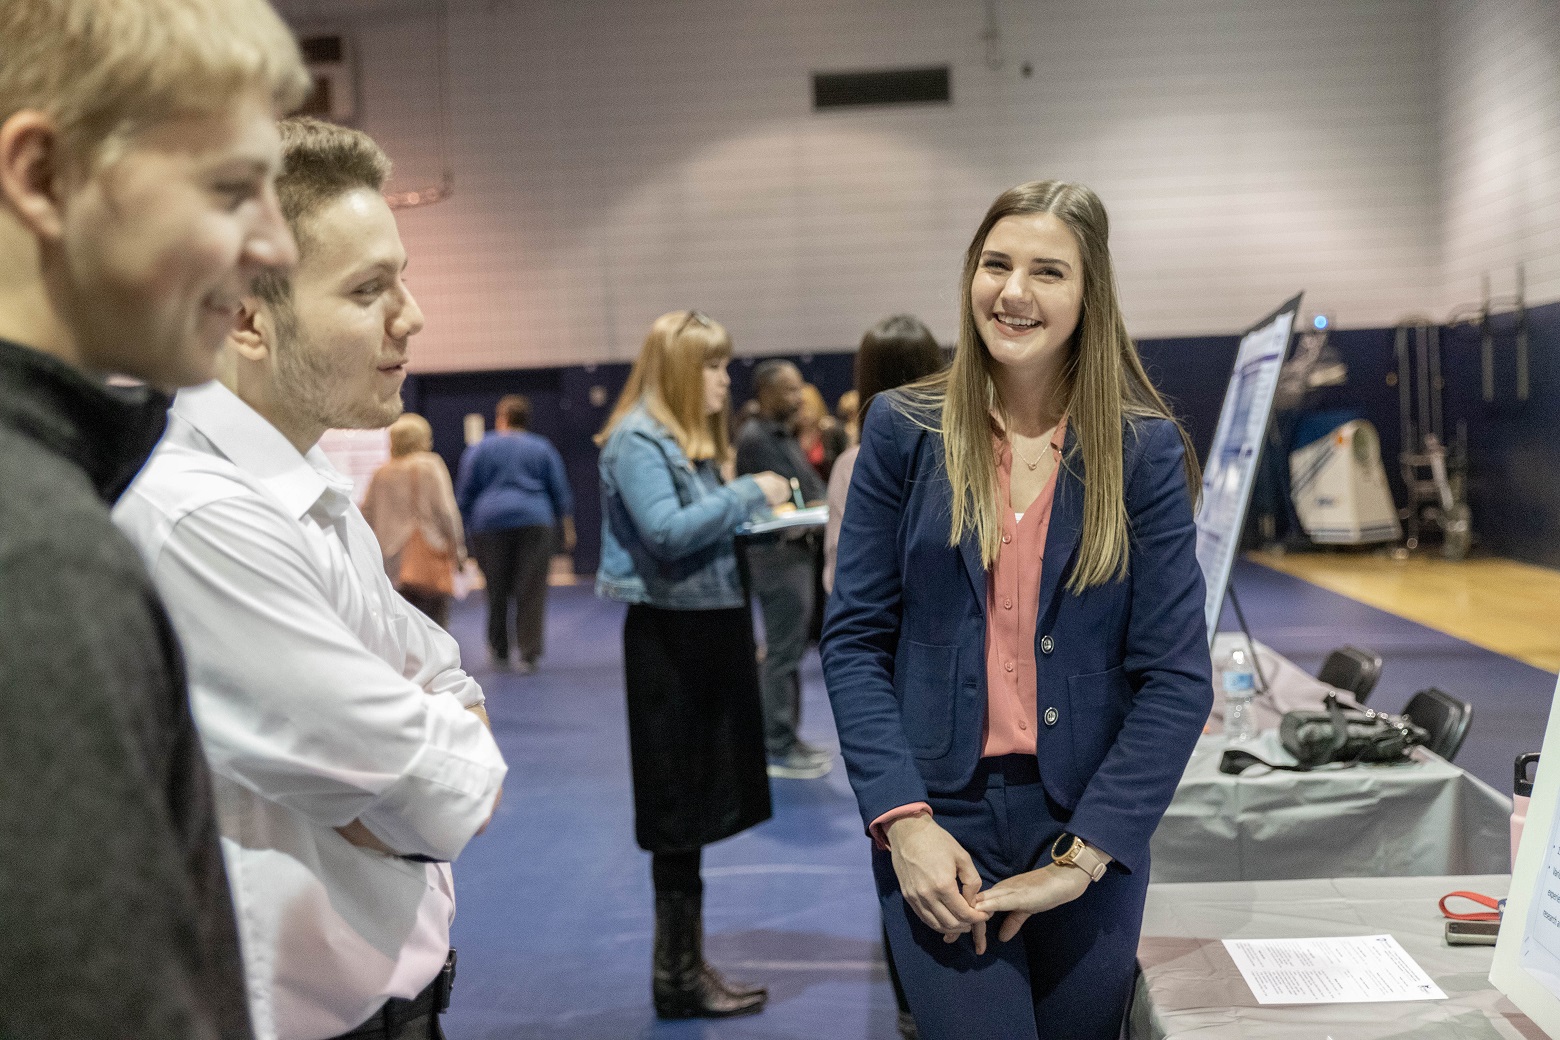 Female student smiles as two male students look at research poster